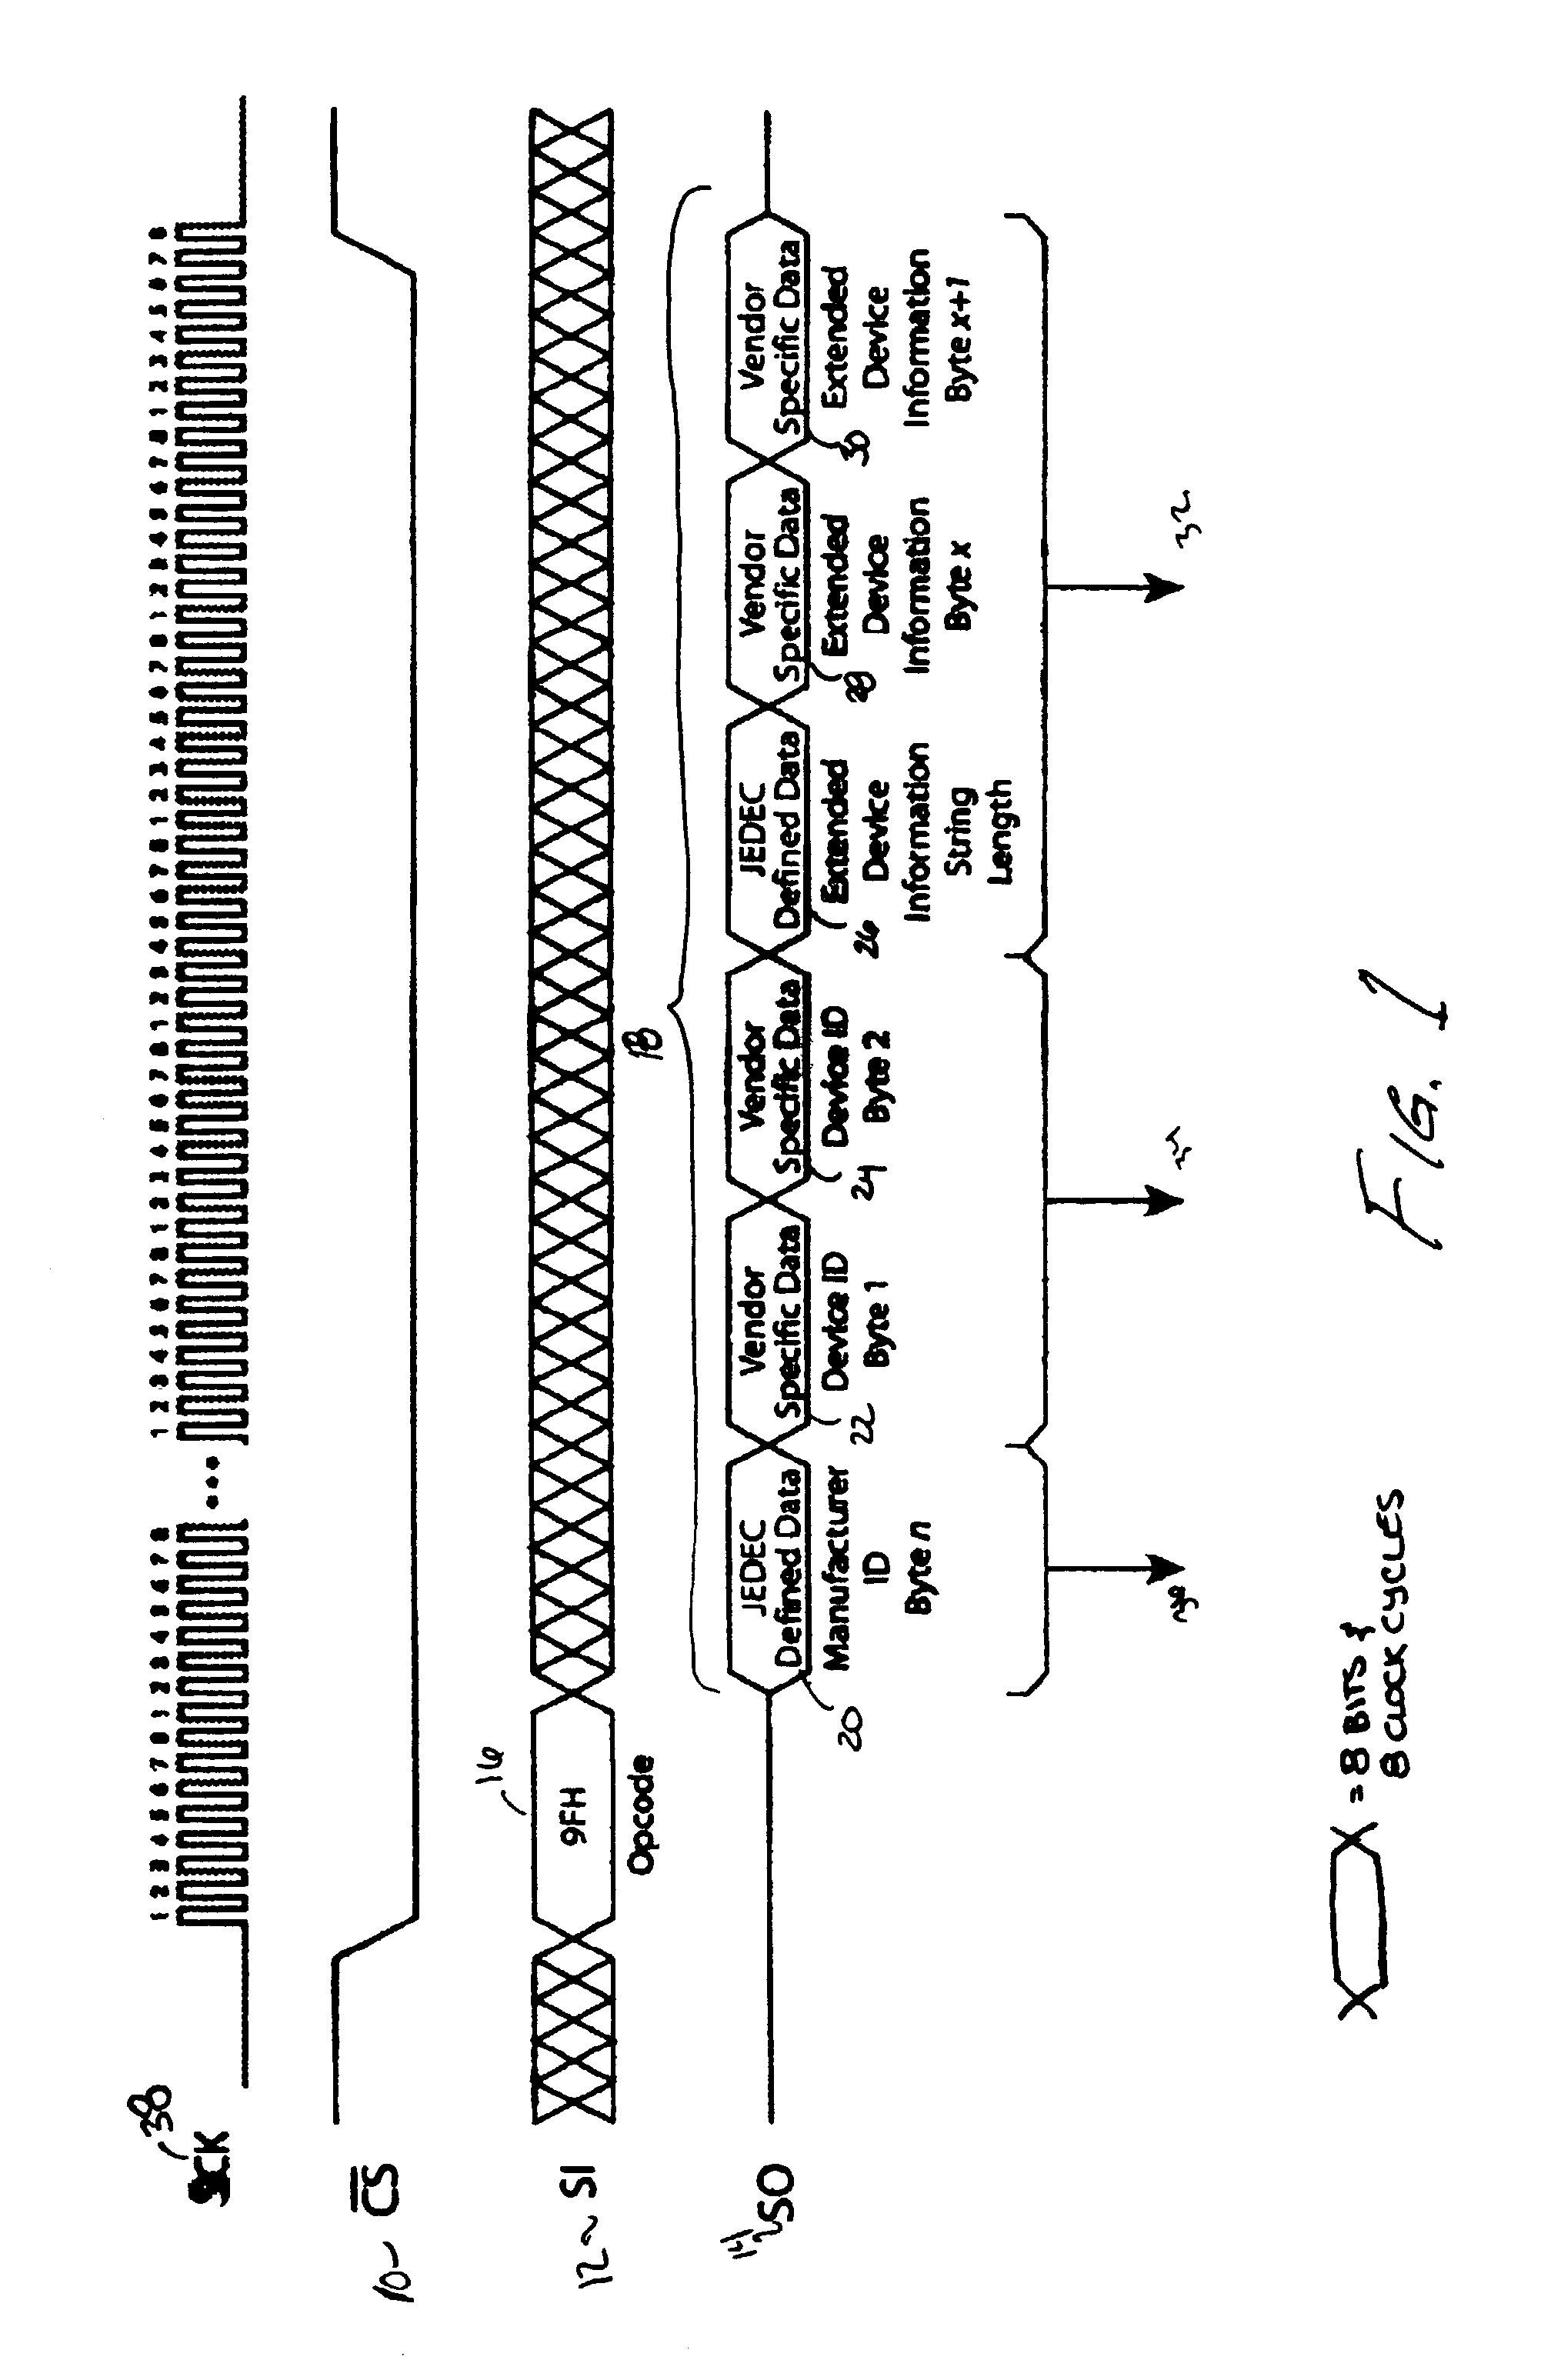 Method for identification of SPI compatible serial memory devices